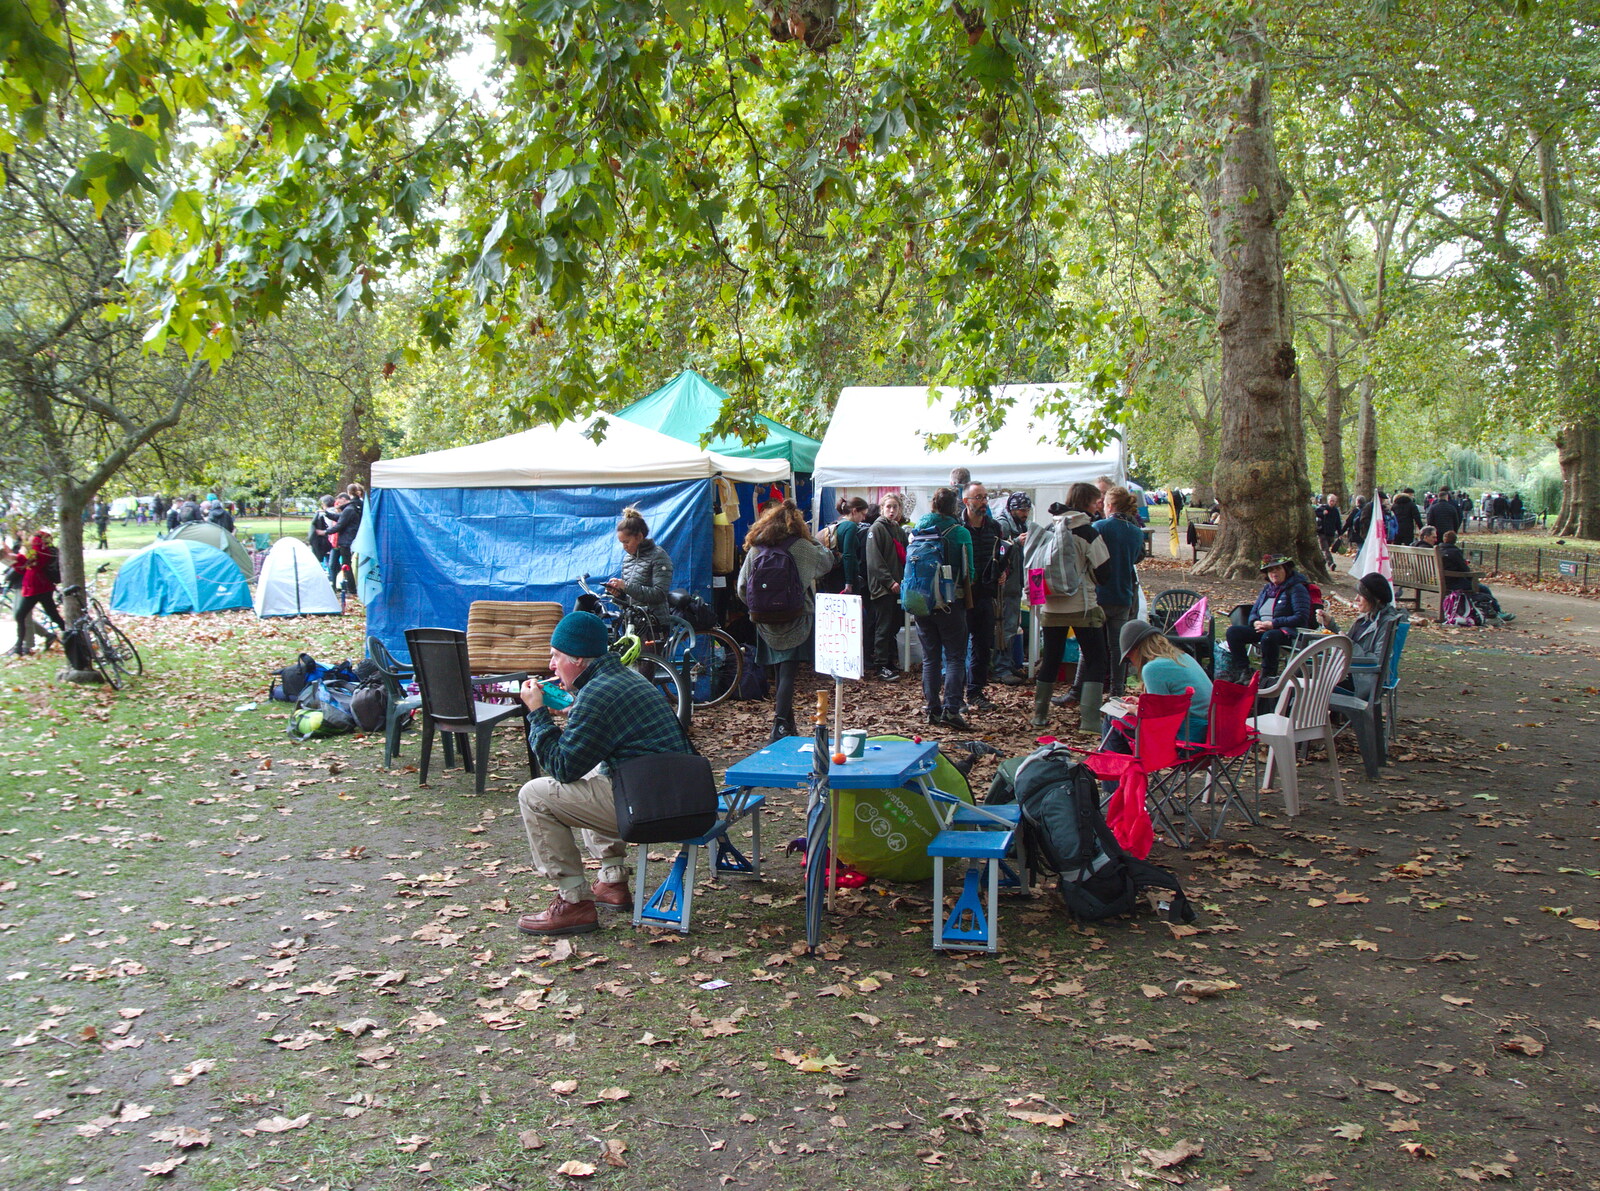 There's a camping vibe in St. James's Park from The Extinction Rebellion Protest, Westminster, London - 9th October 2019